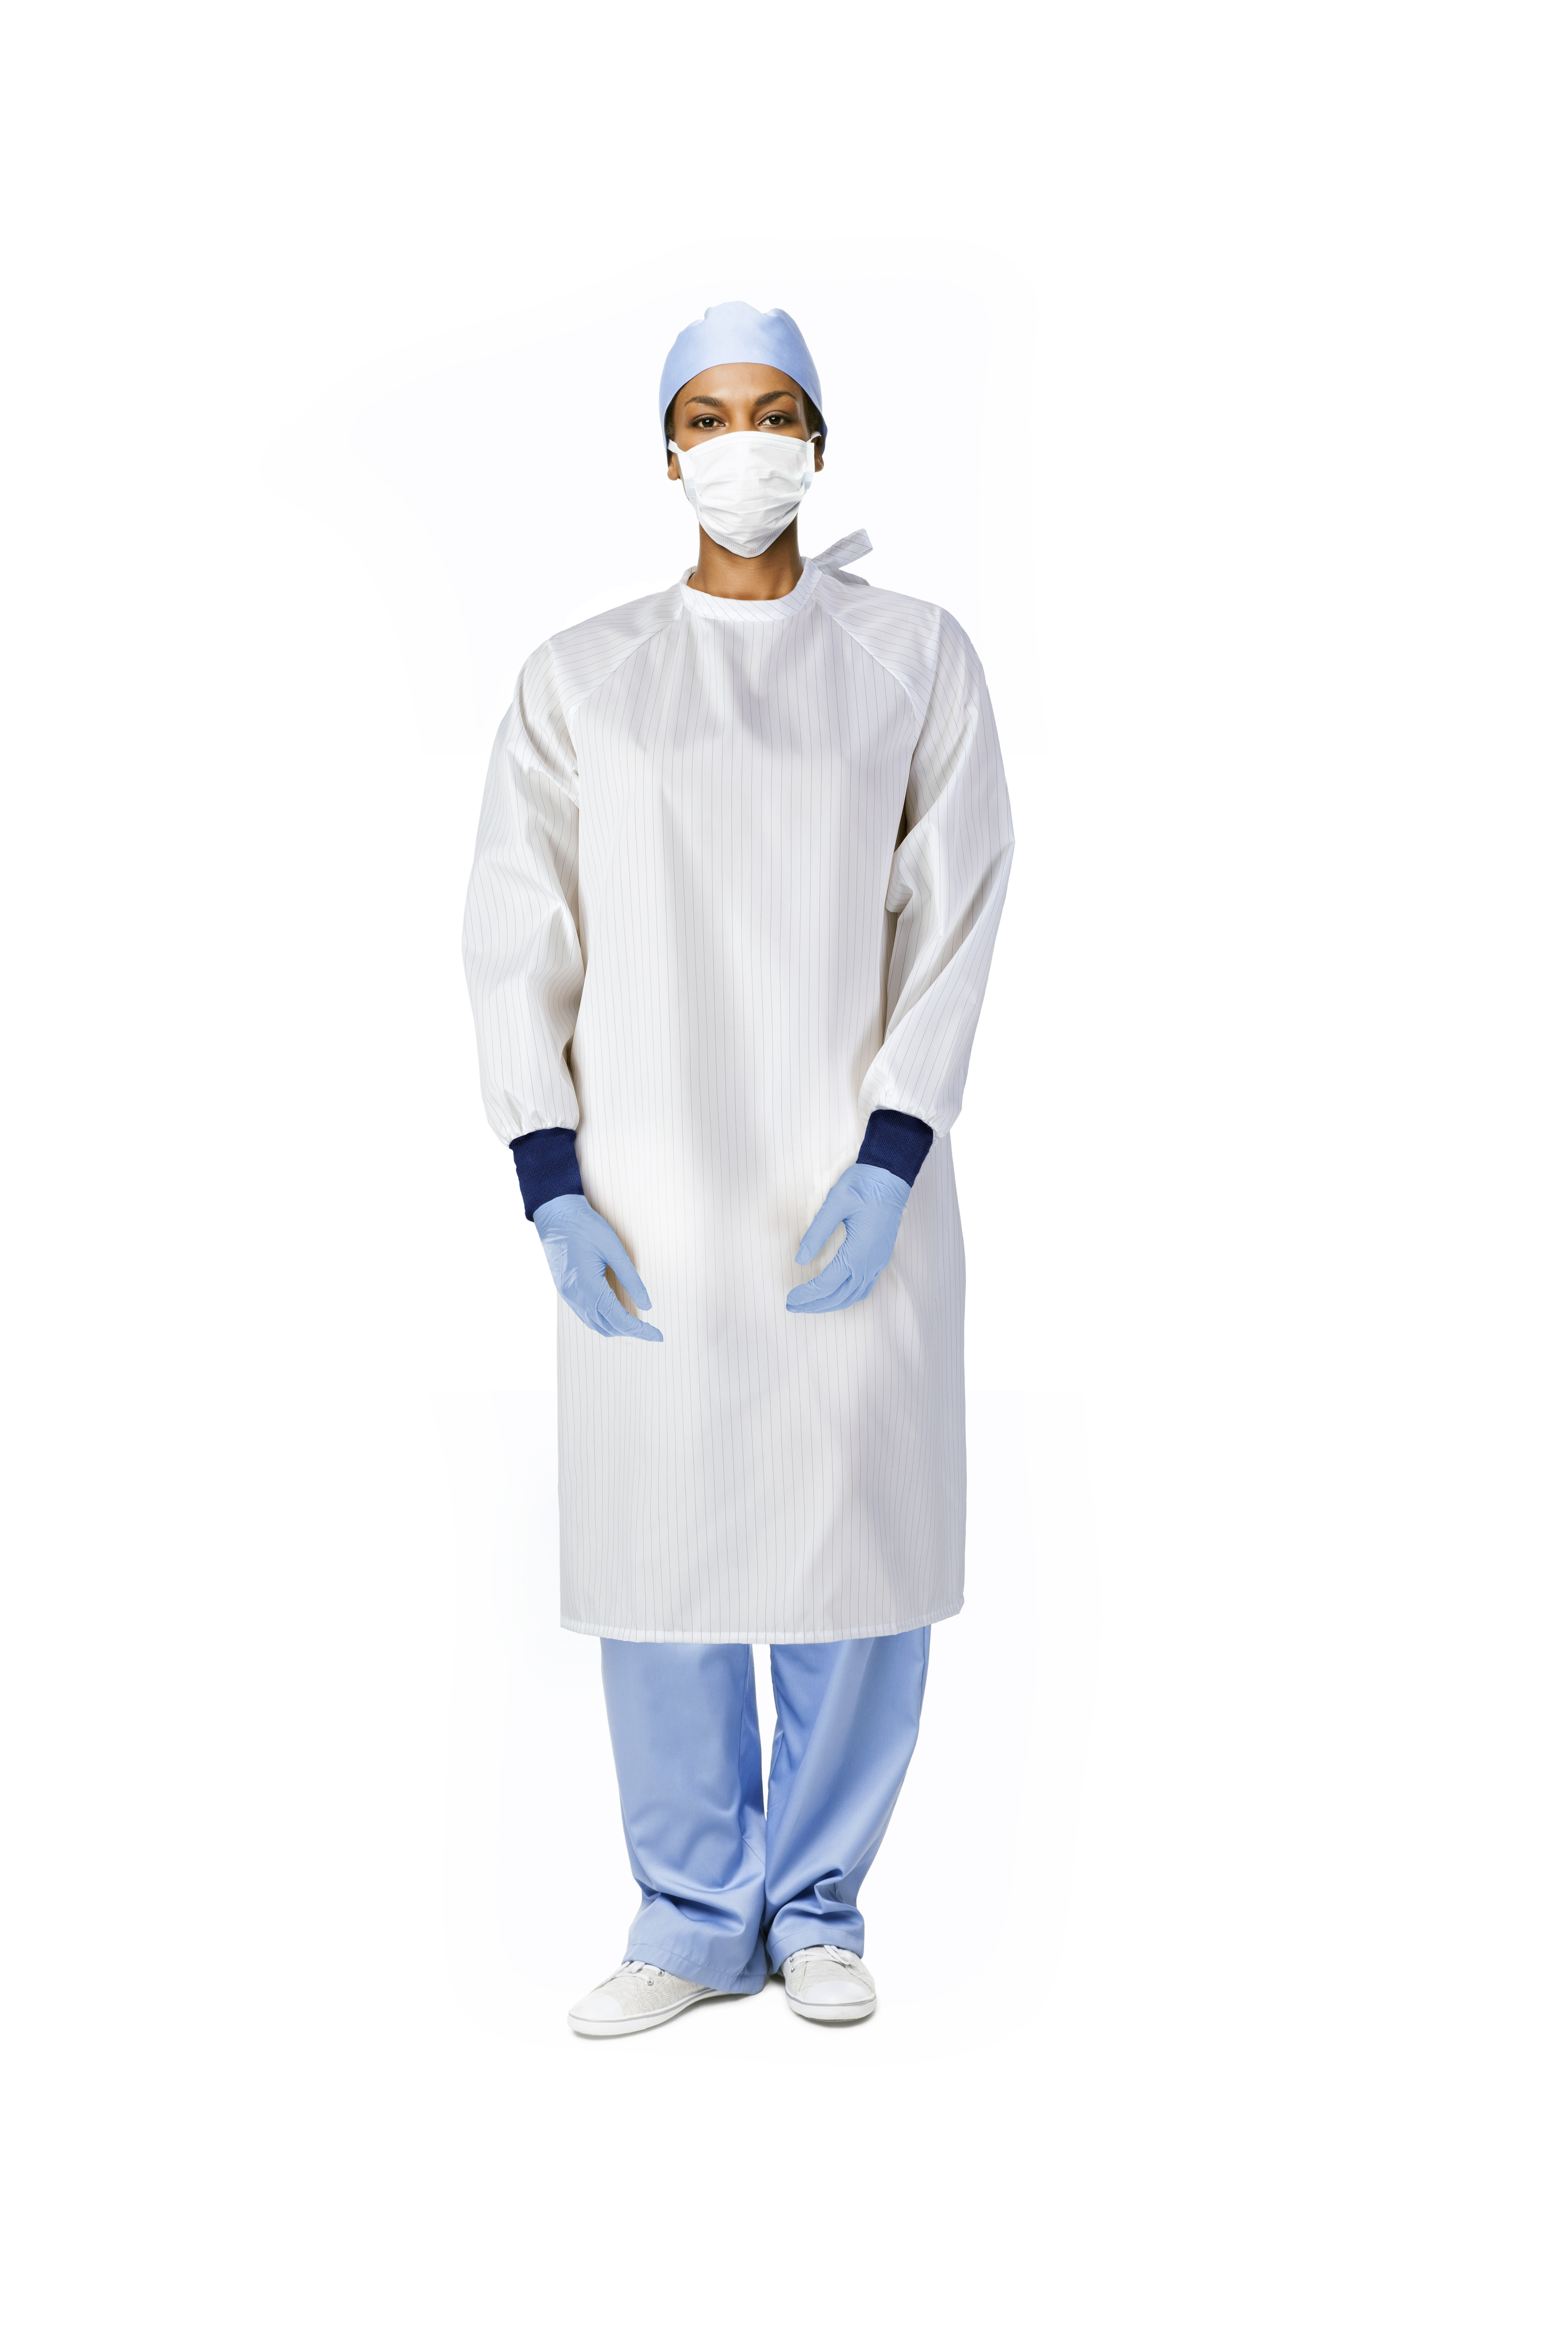 Medical & Specialty Fabric Manufacturer